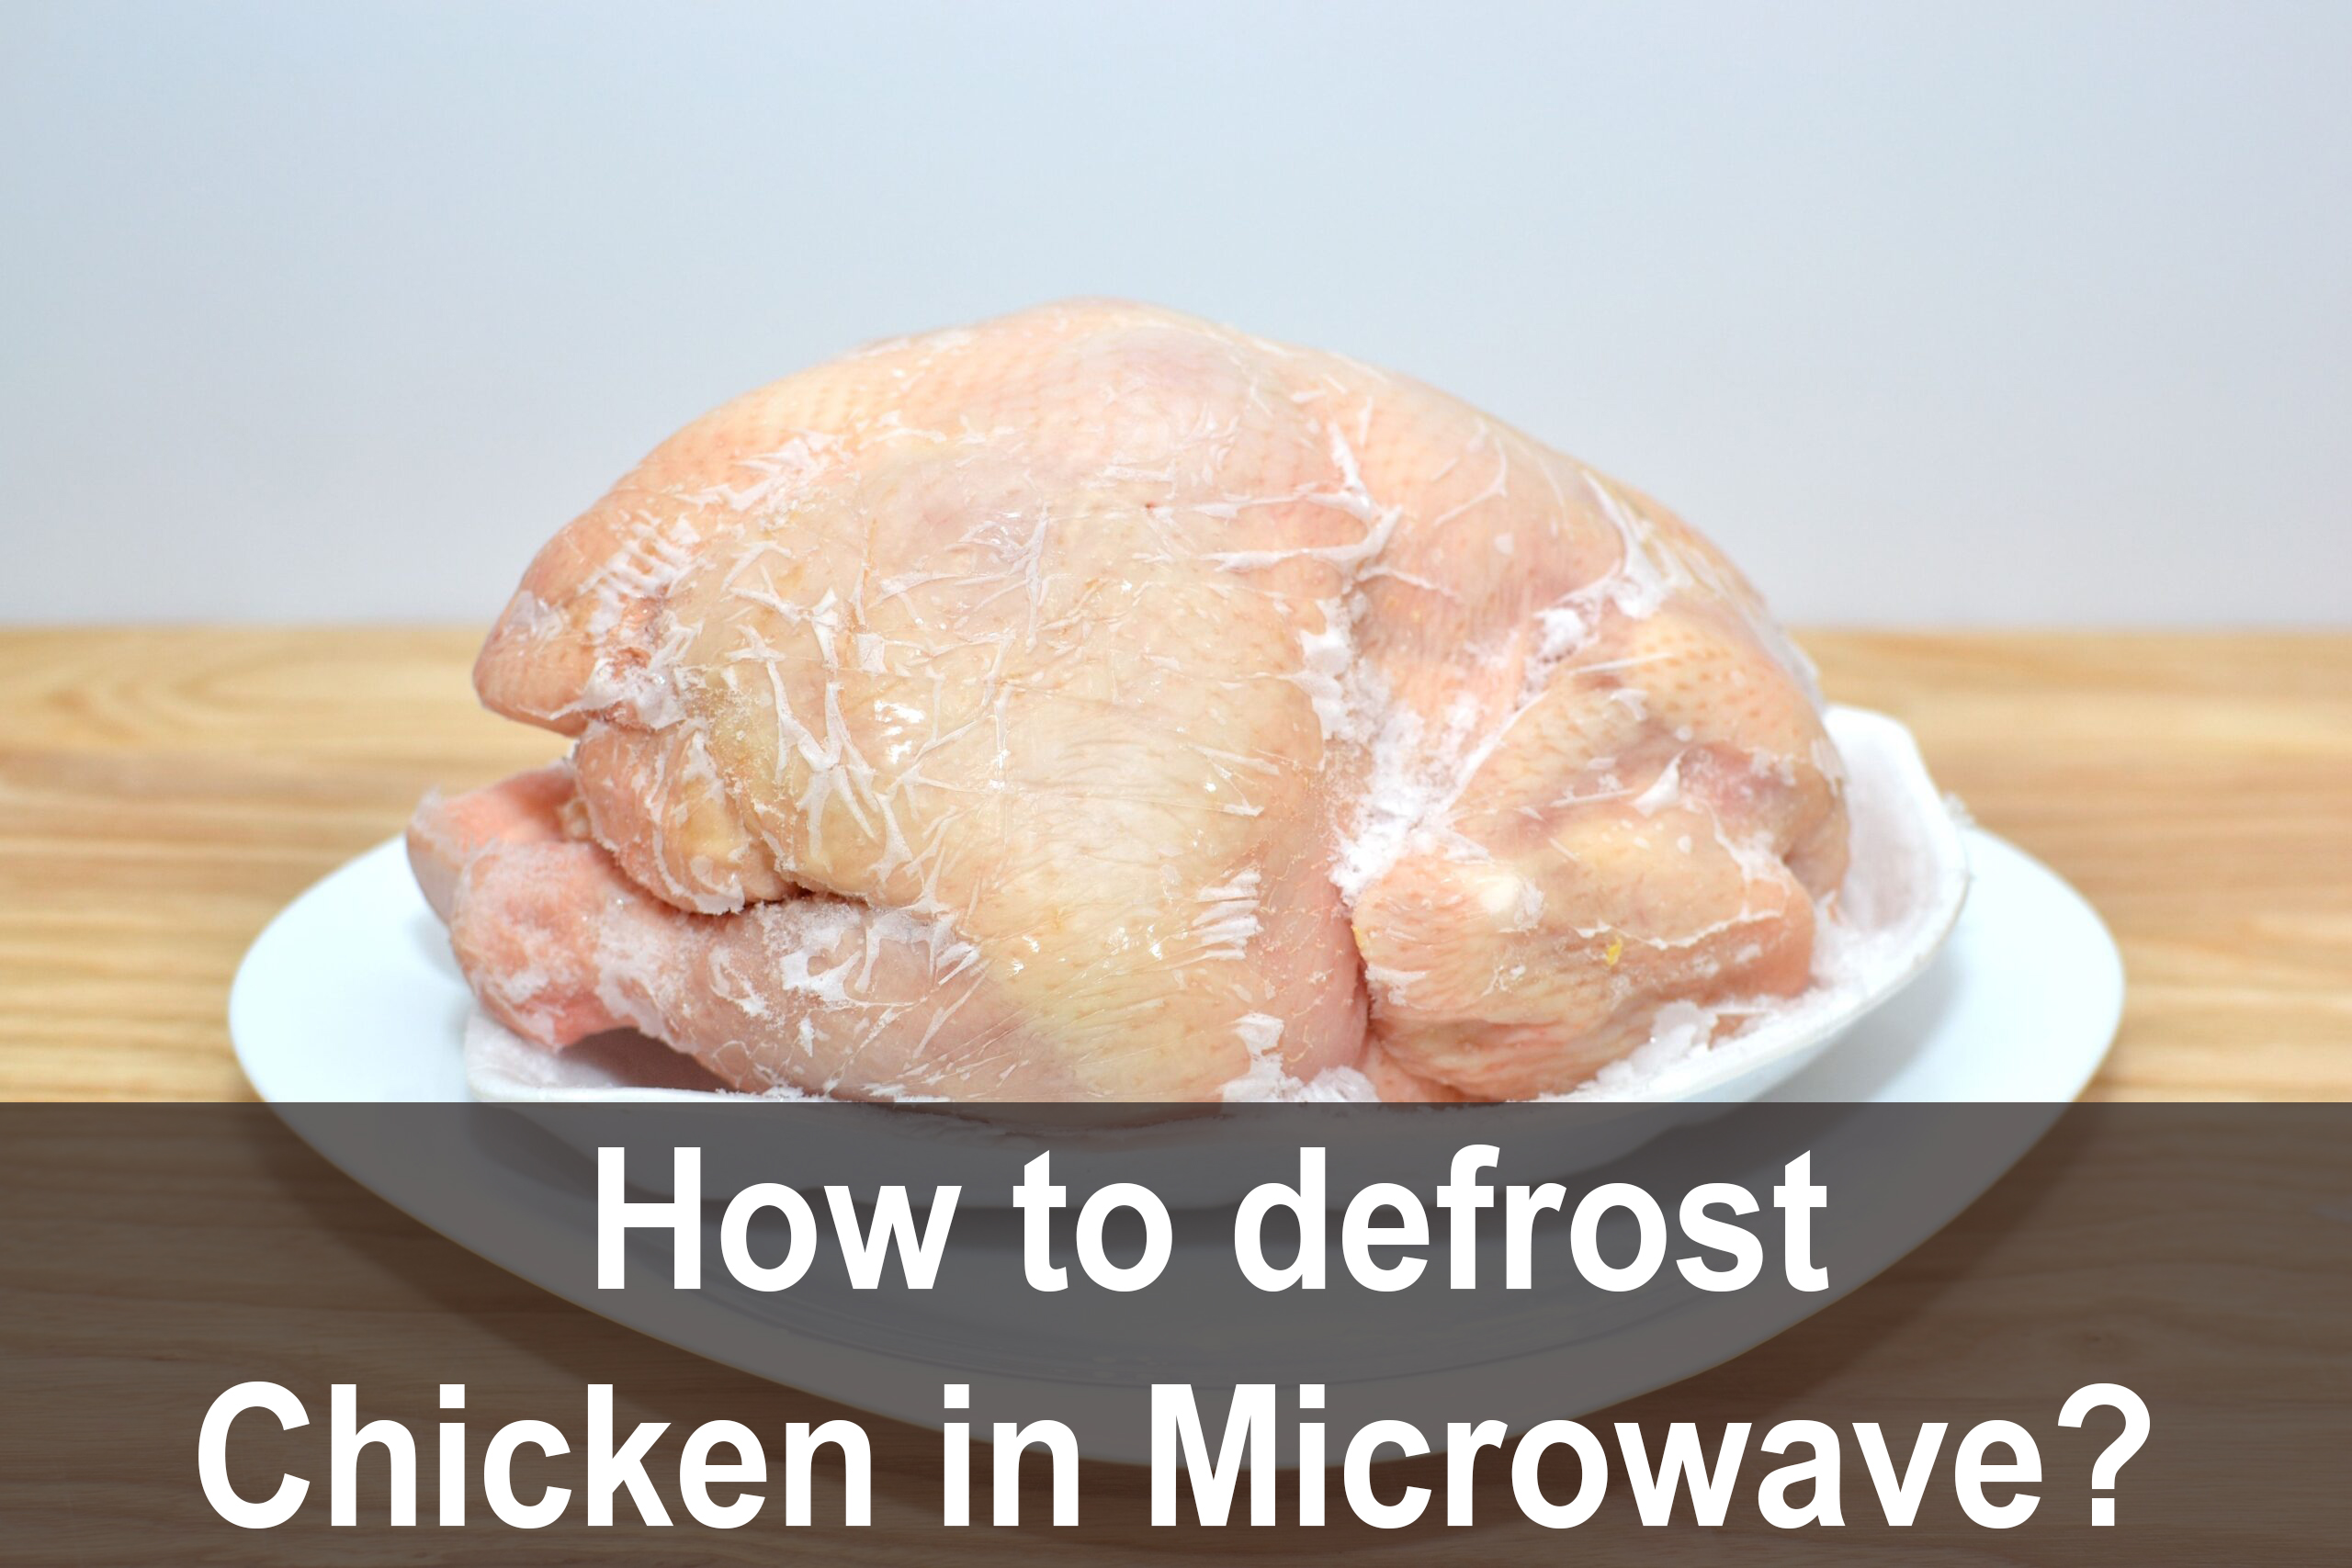 How to defrost chicken in Microwave?